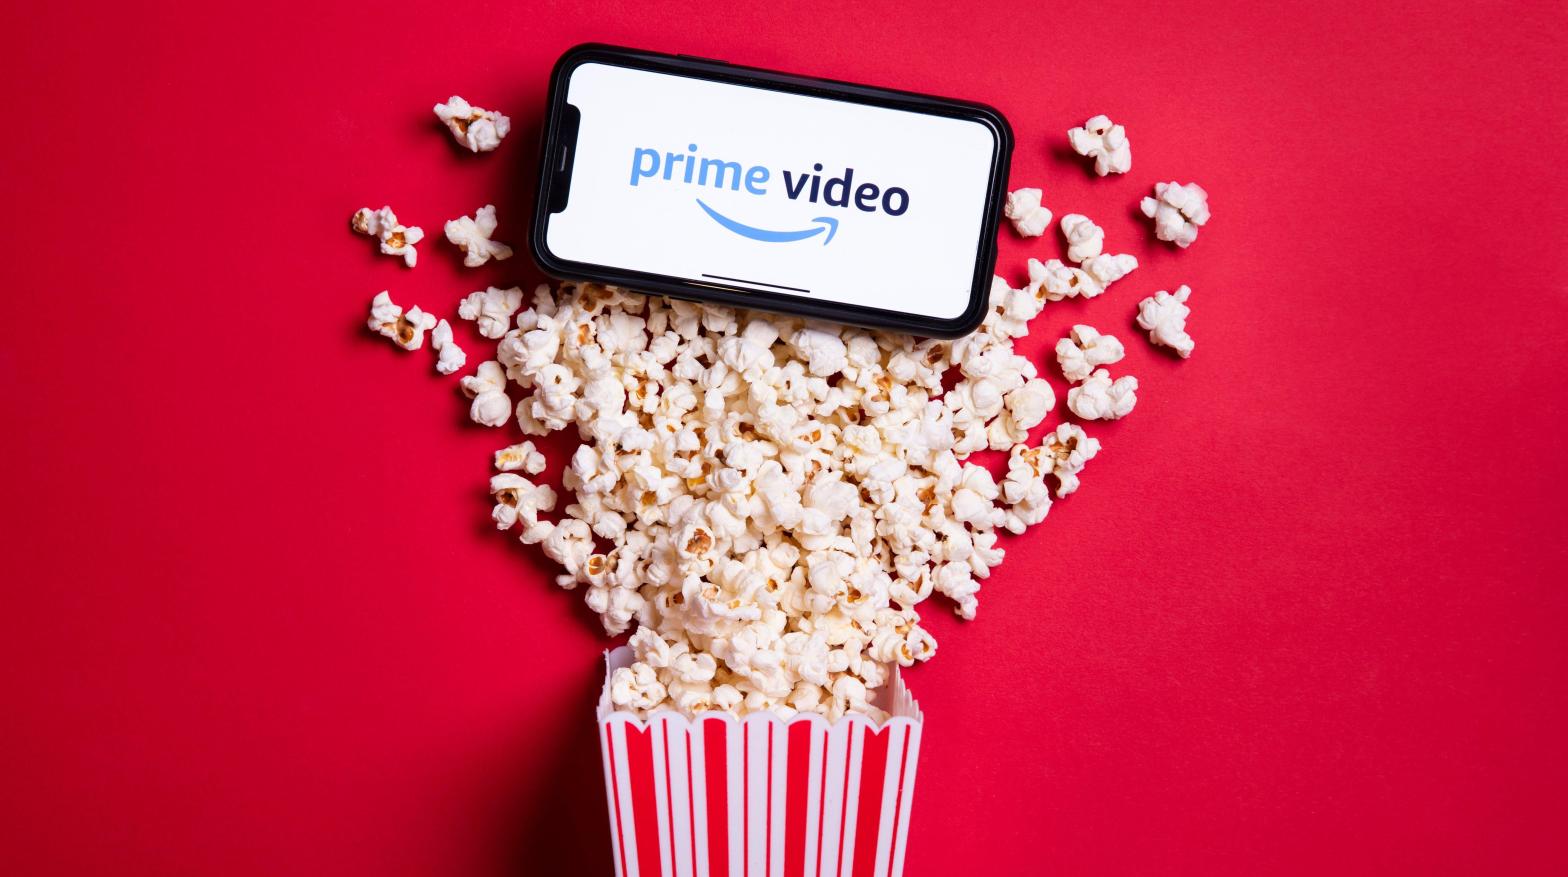 Amazon reportedly wants to see its logo on the big screen in 2023. (Photo: Ink Drop, Shutterstock)